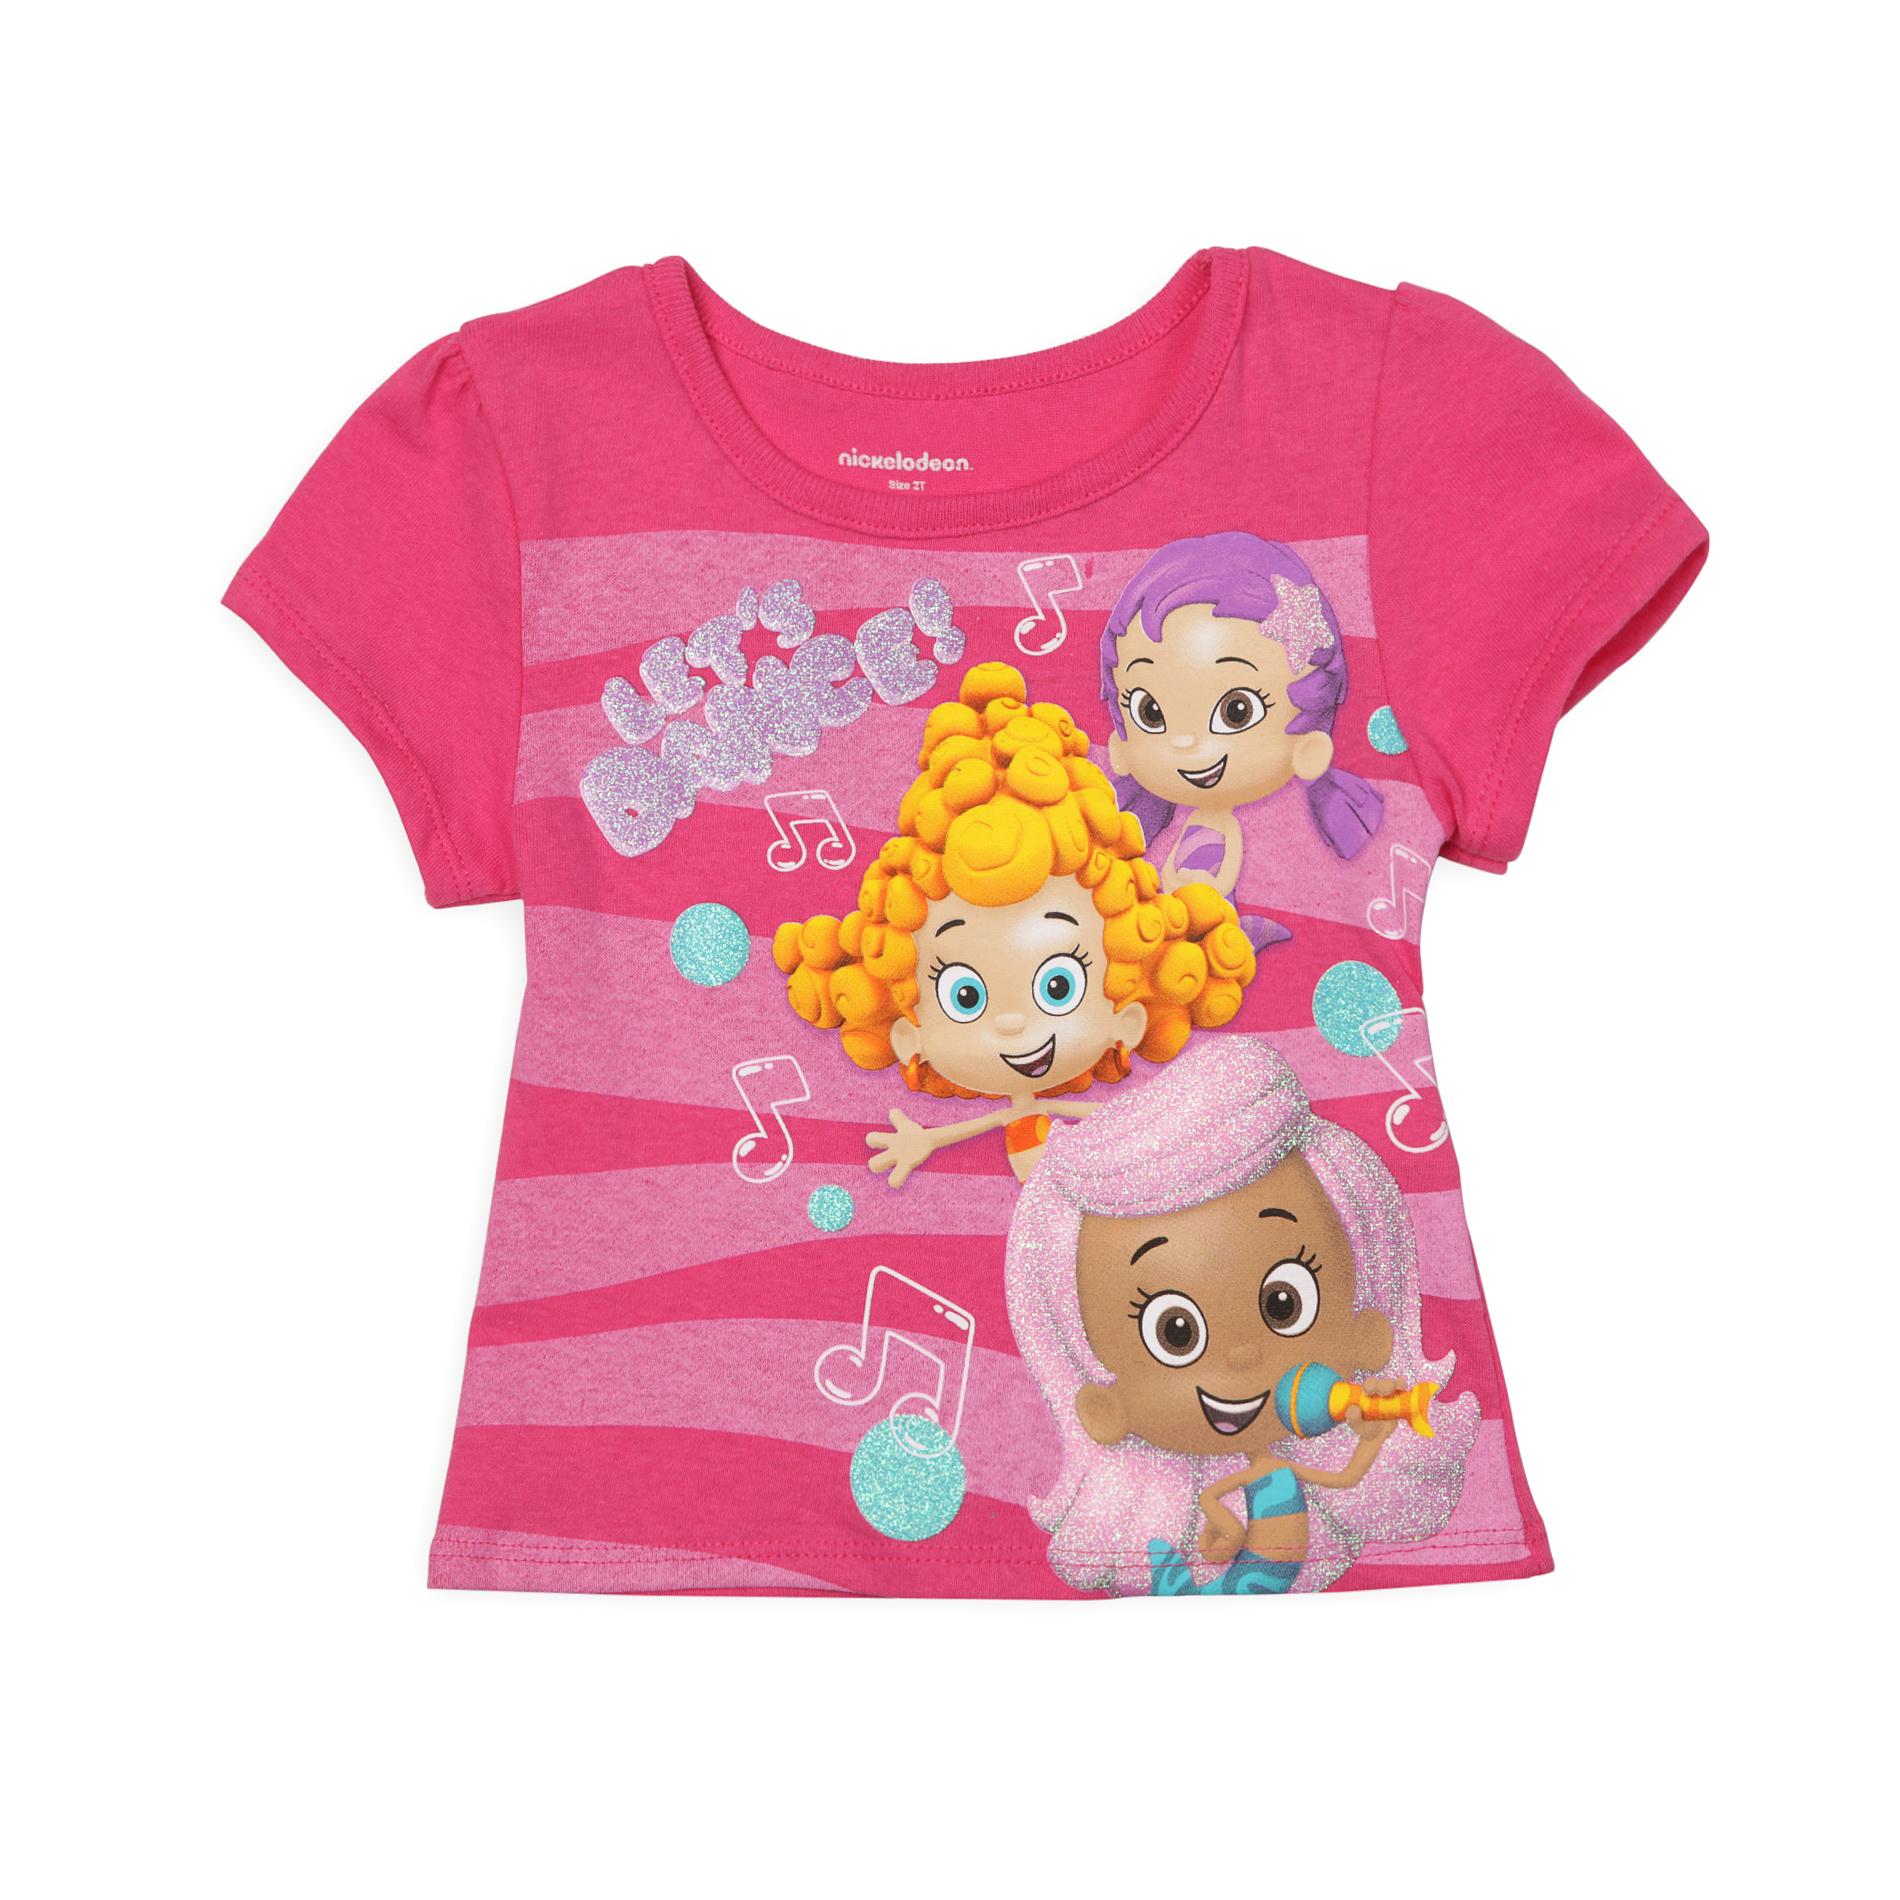 Nickelodeon Toddler Girl's Graphic T-Shirt - Bubble Guppies